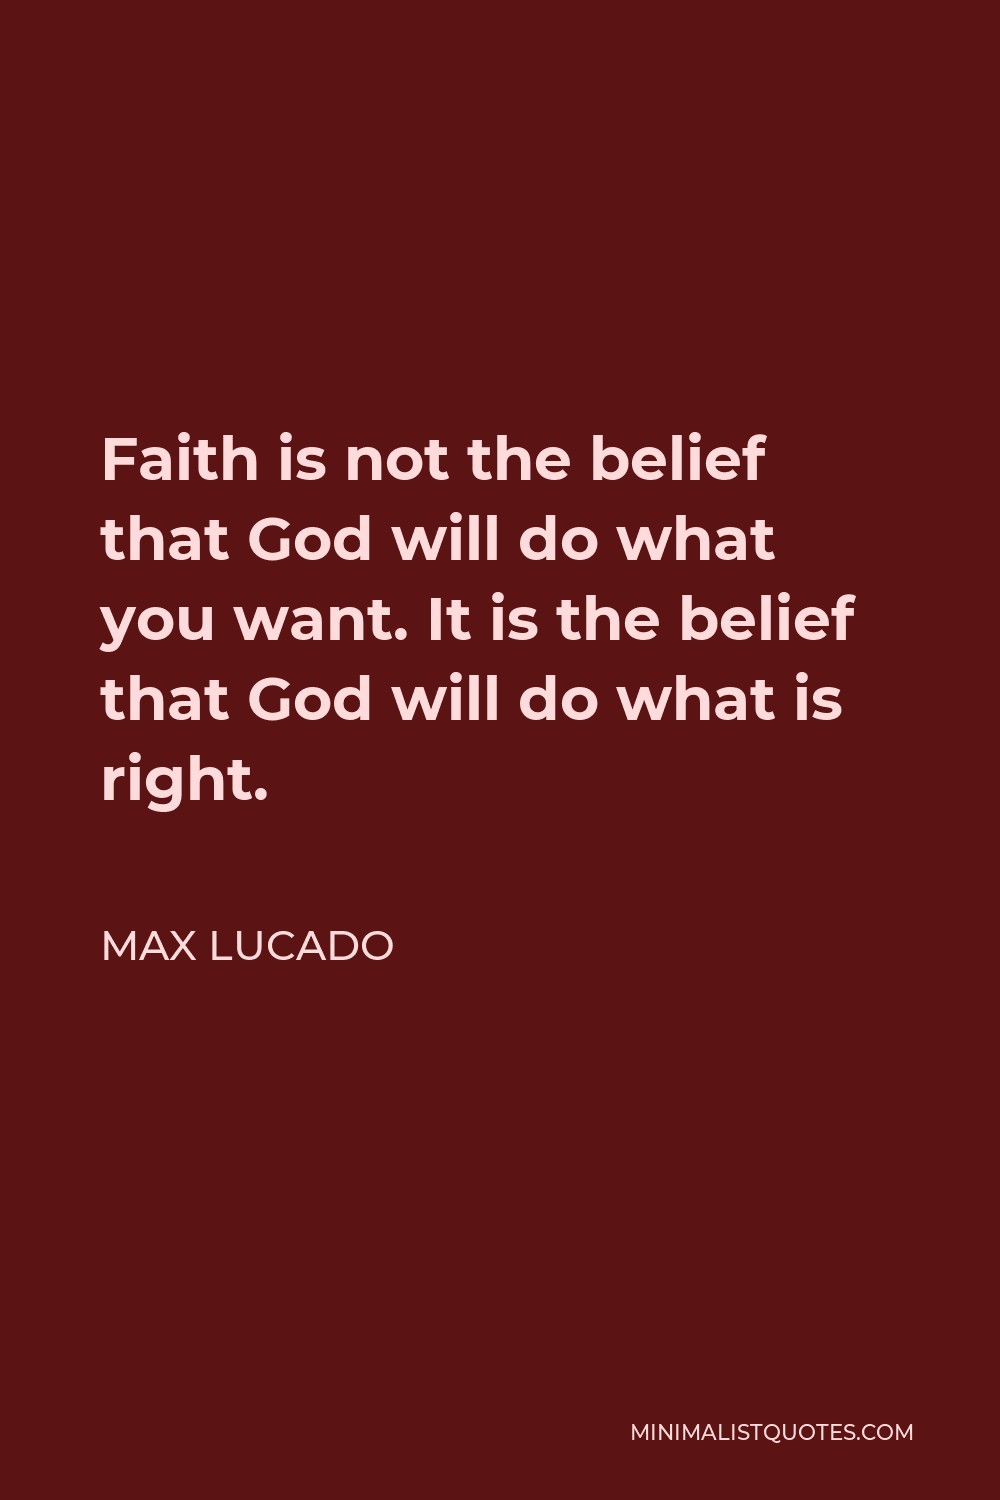 Max Lucado Quote - Faith is not the belief that God will do what you want. It is the belief that God will do what is right.